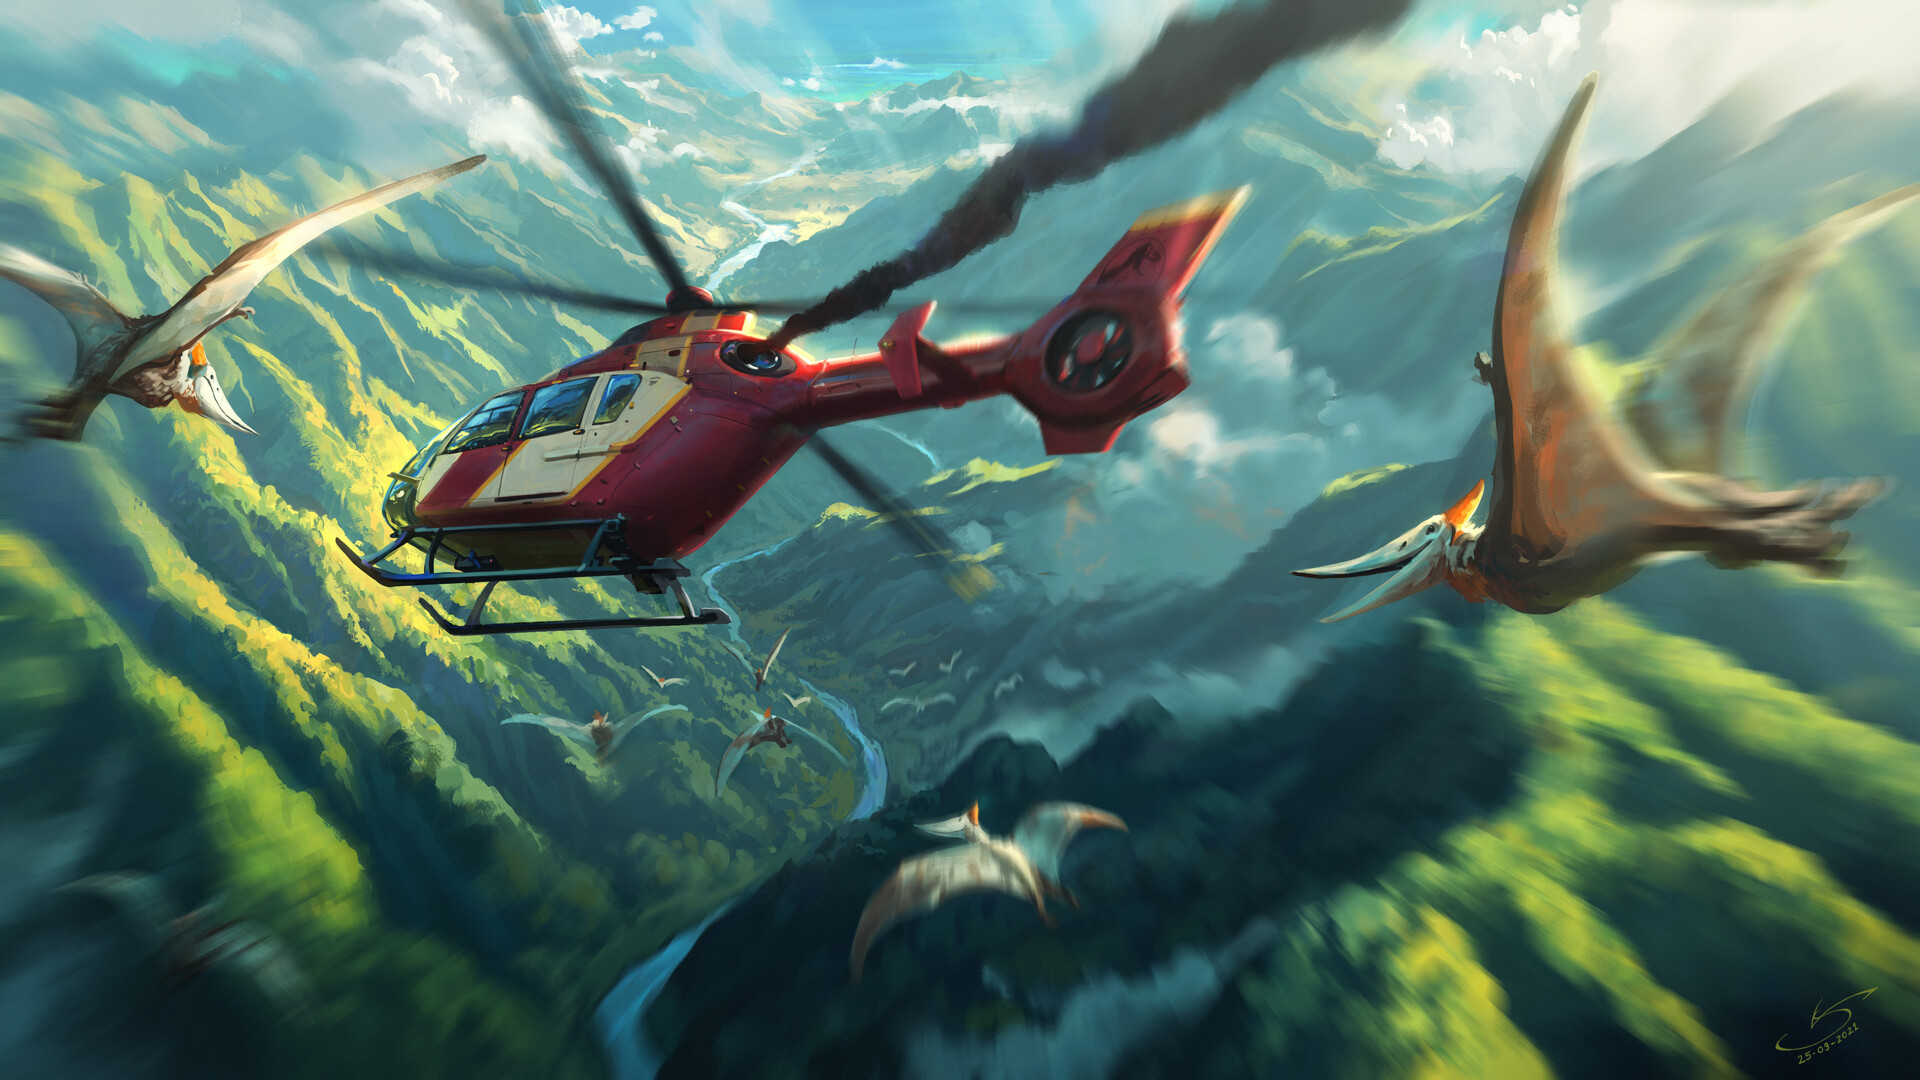 Helicopters Jurassic World Dinosaurs Pterodactyl River Valley Mountains Artwork 1920x1080